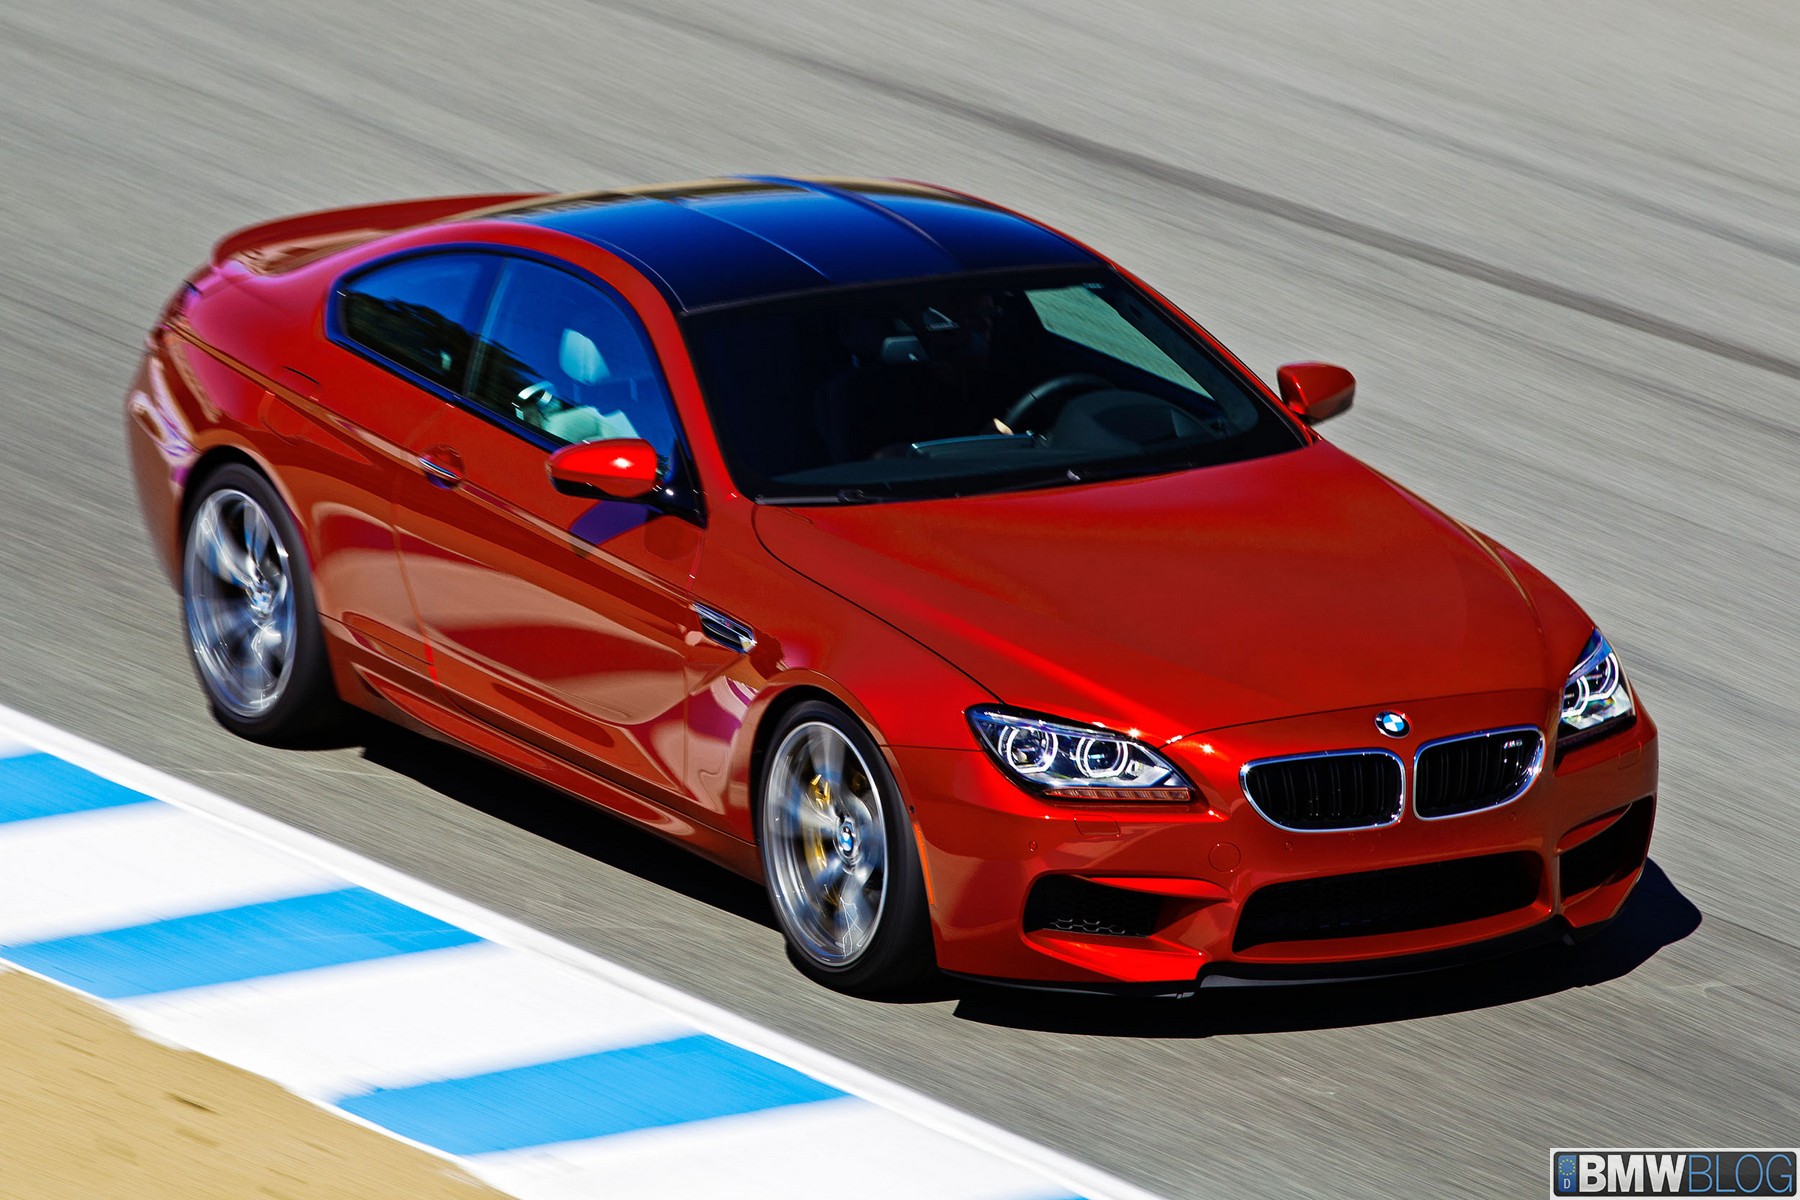 2013 bmw m6 coupe 092 655x436 Laguna Seca: 2013 BMW M6 Coupe and M5